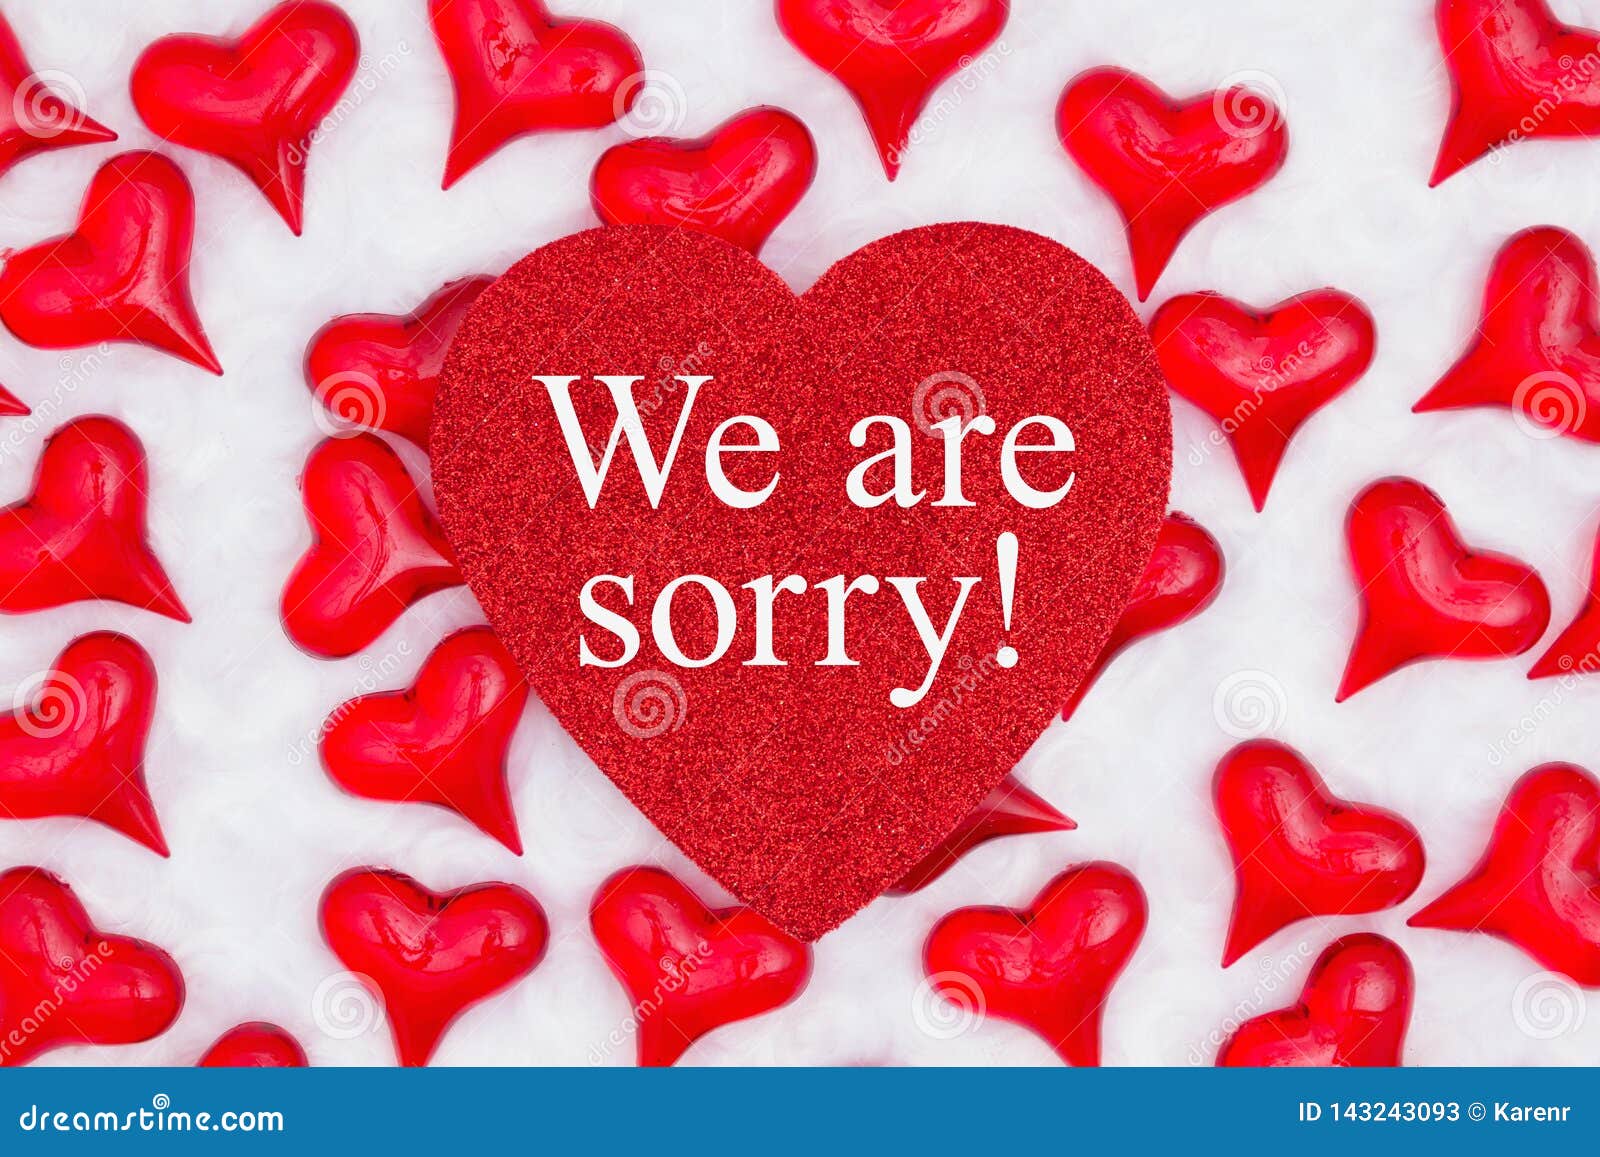 We are Sorry Message on Glitter Heart with Red Hearts on White ...